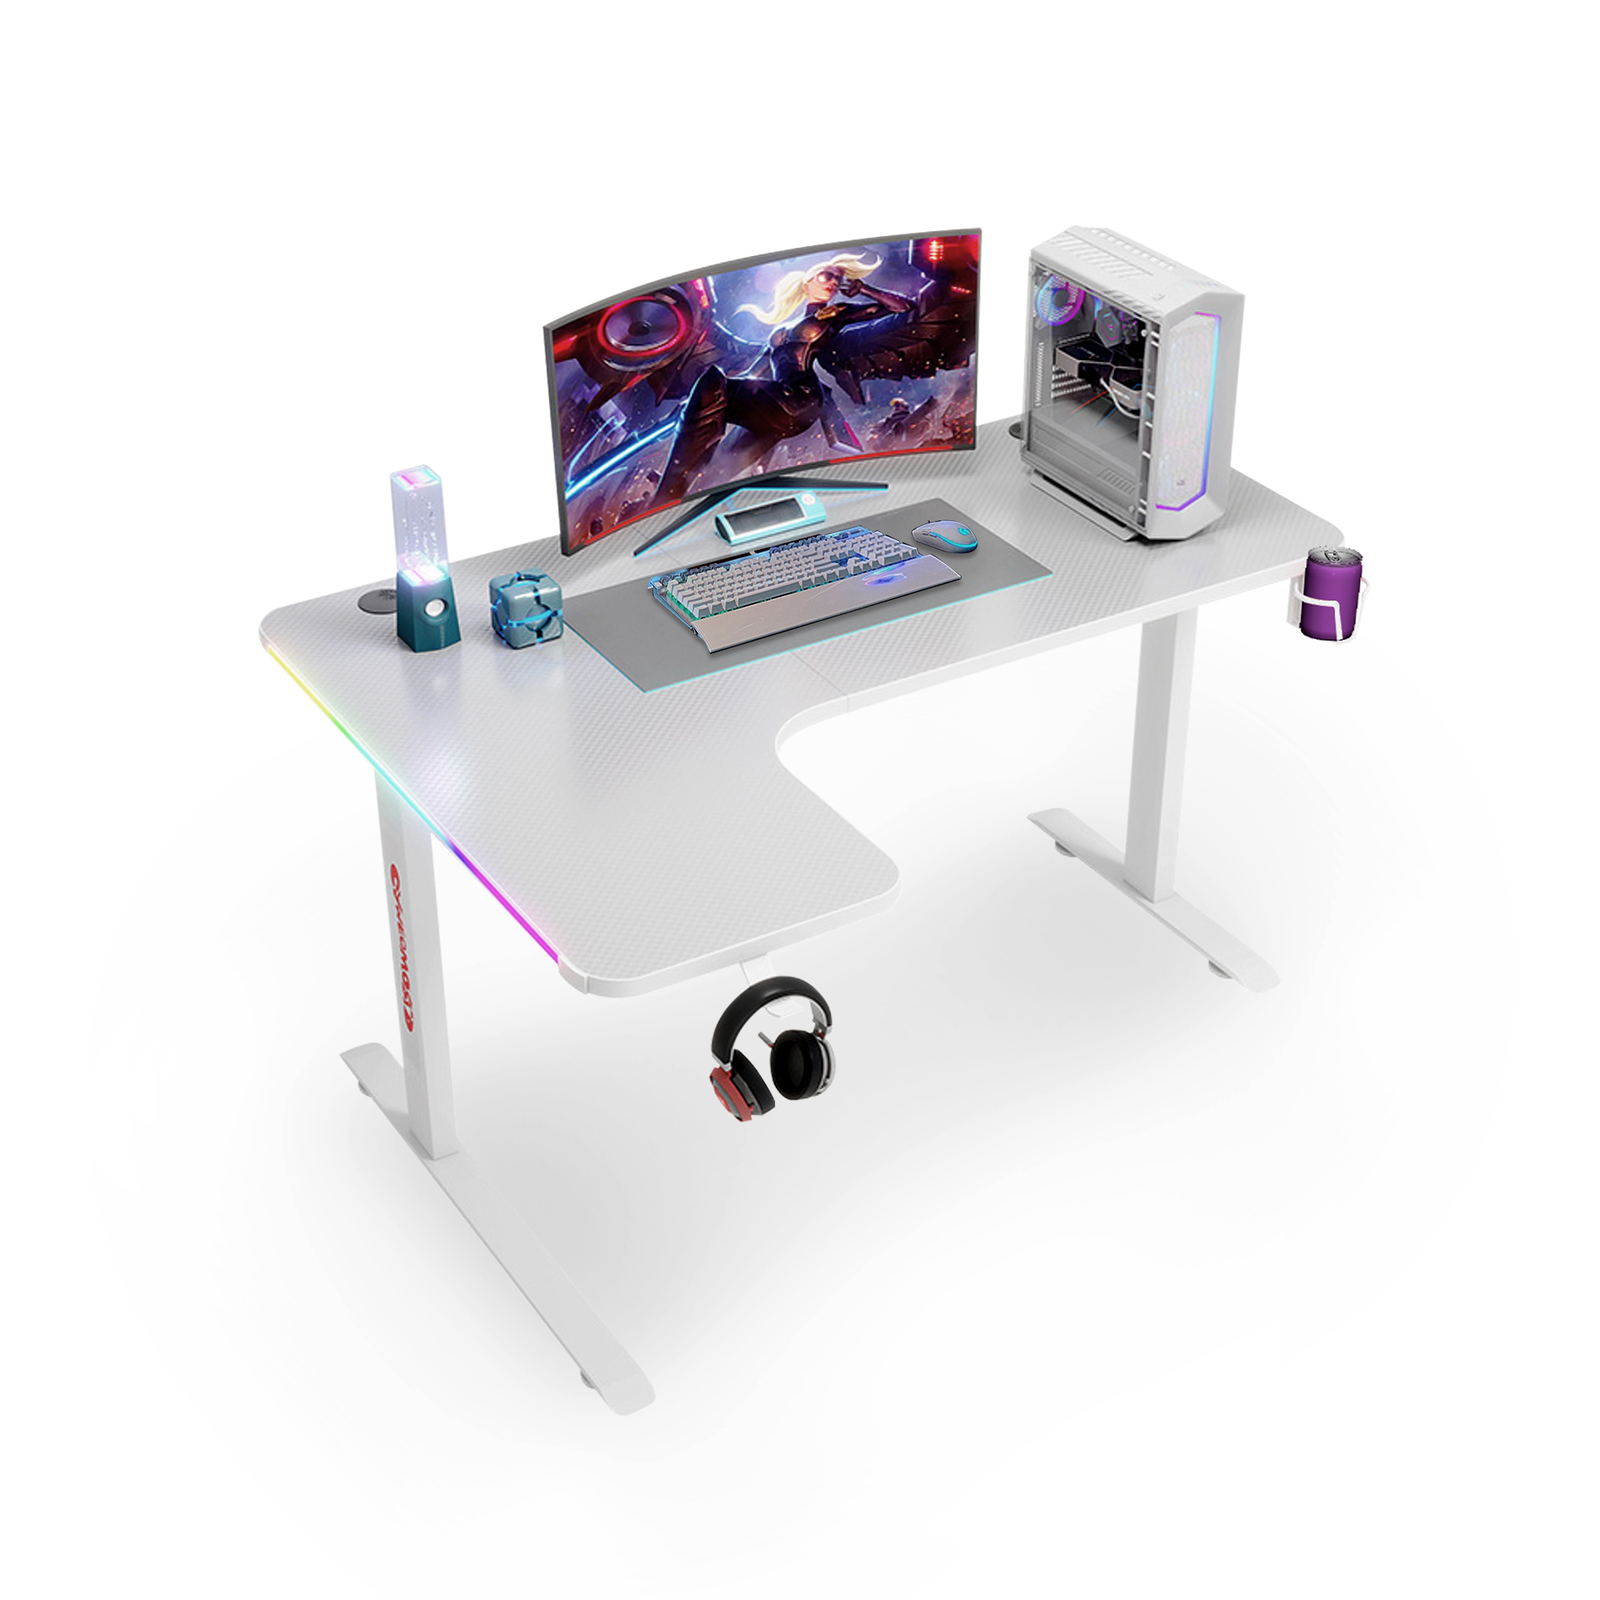 140cm White RGB LED Gaming Desk Computer Home Office Writing Desk Racer Table Carbon Fiber Table With Cup Holder and Headphone Hook